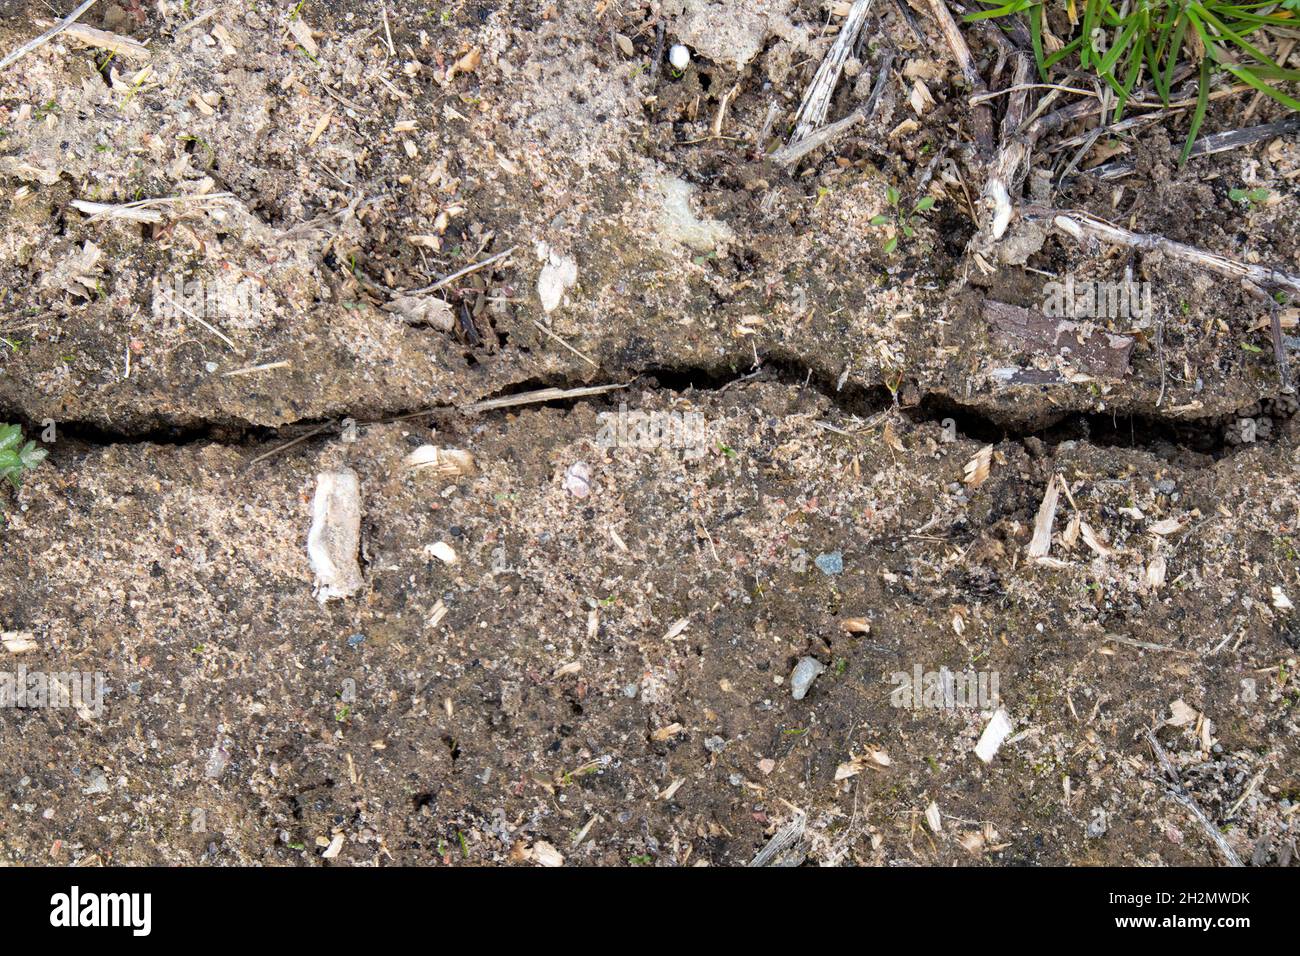 Cracked soil with big crack in the middle and pieces of grass and trash nearby Stock Photo